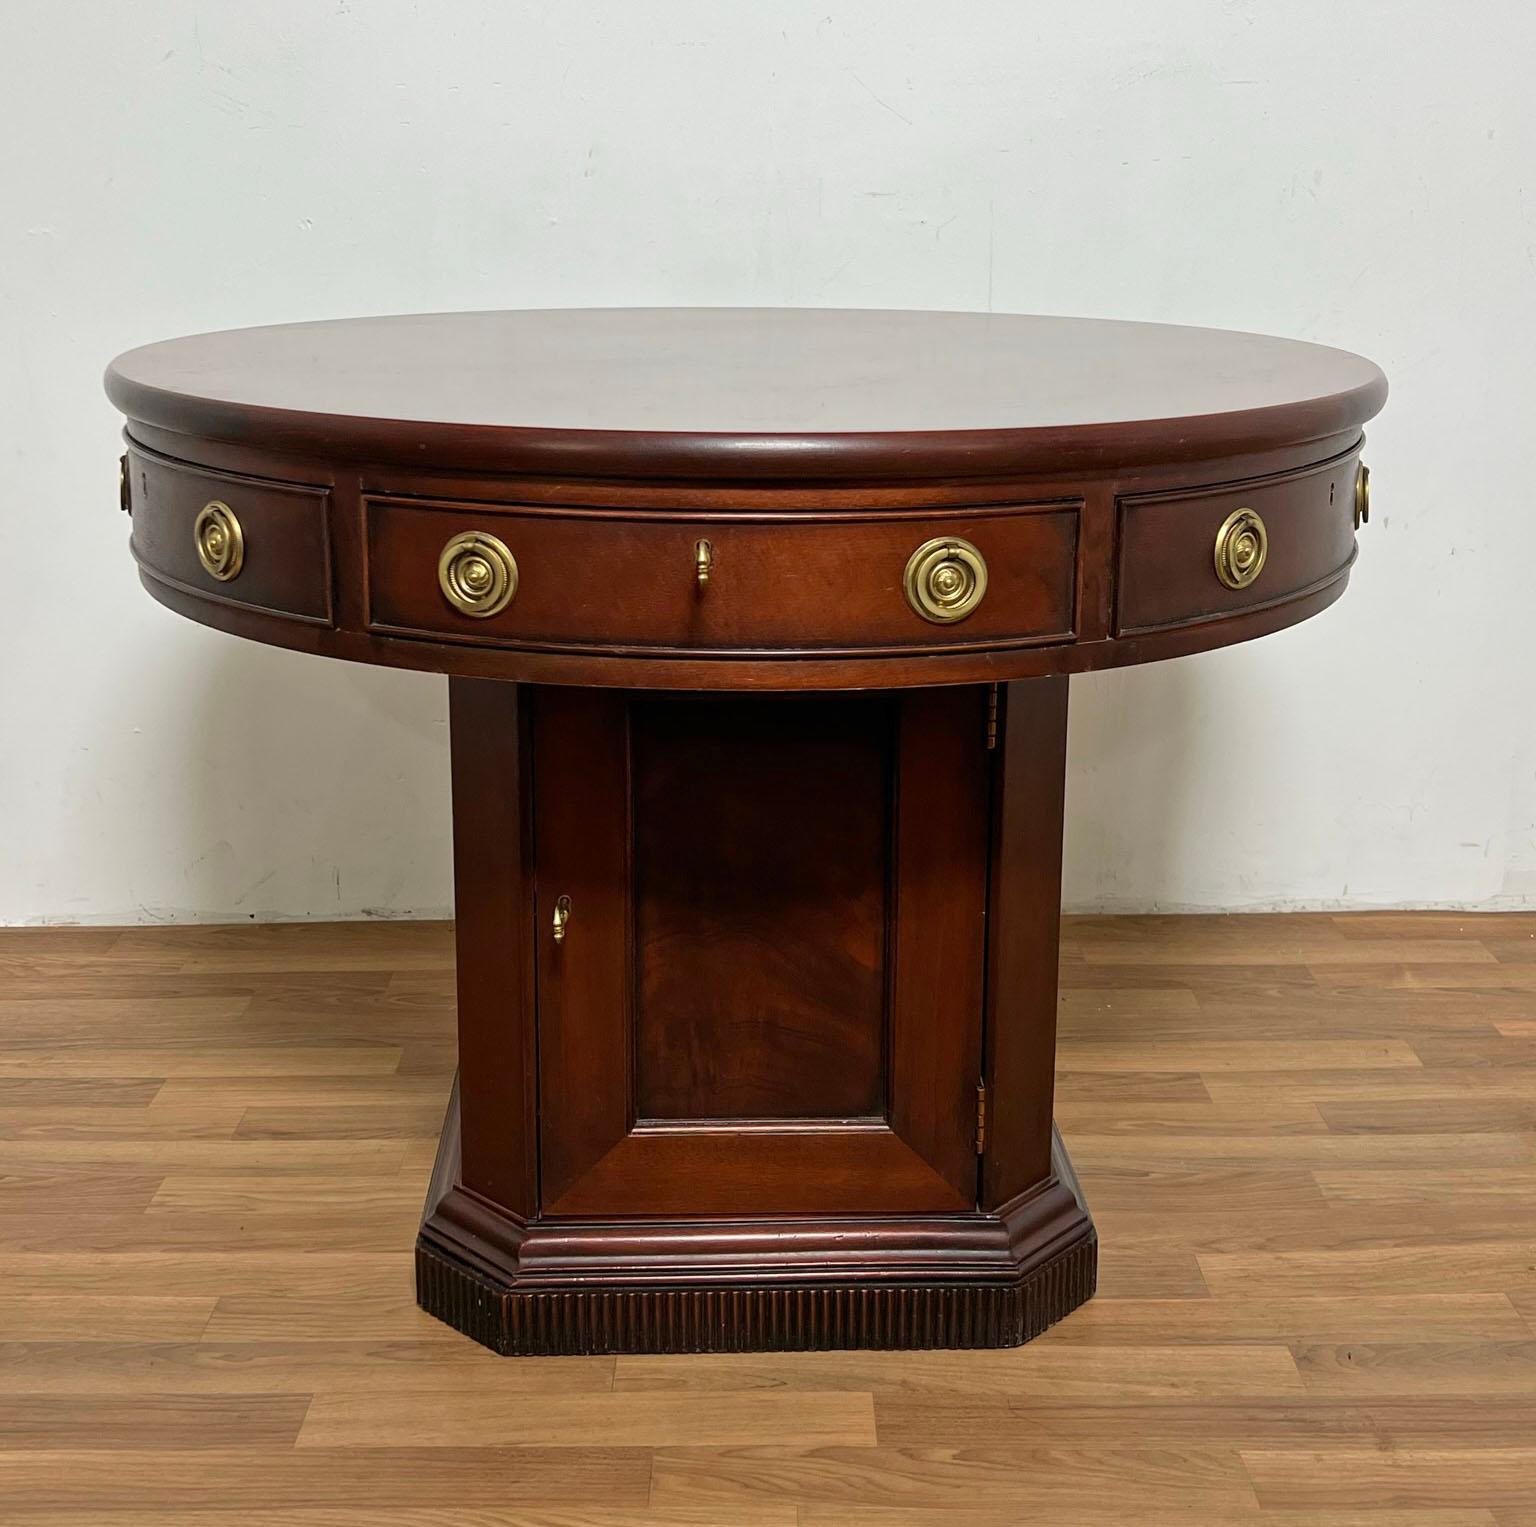 A Georgian style mahogany rent table by Ralph Lauren, ca. early 1990s. Features a banding of drawers along the edge top and a locking cupboard beneath with plenty of room for the landlord’s bags of gold!